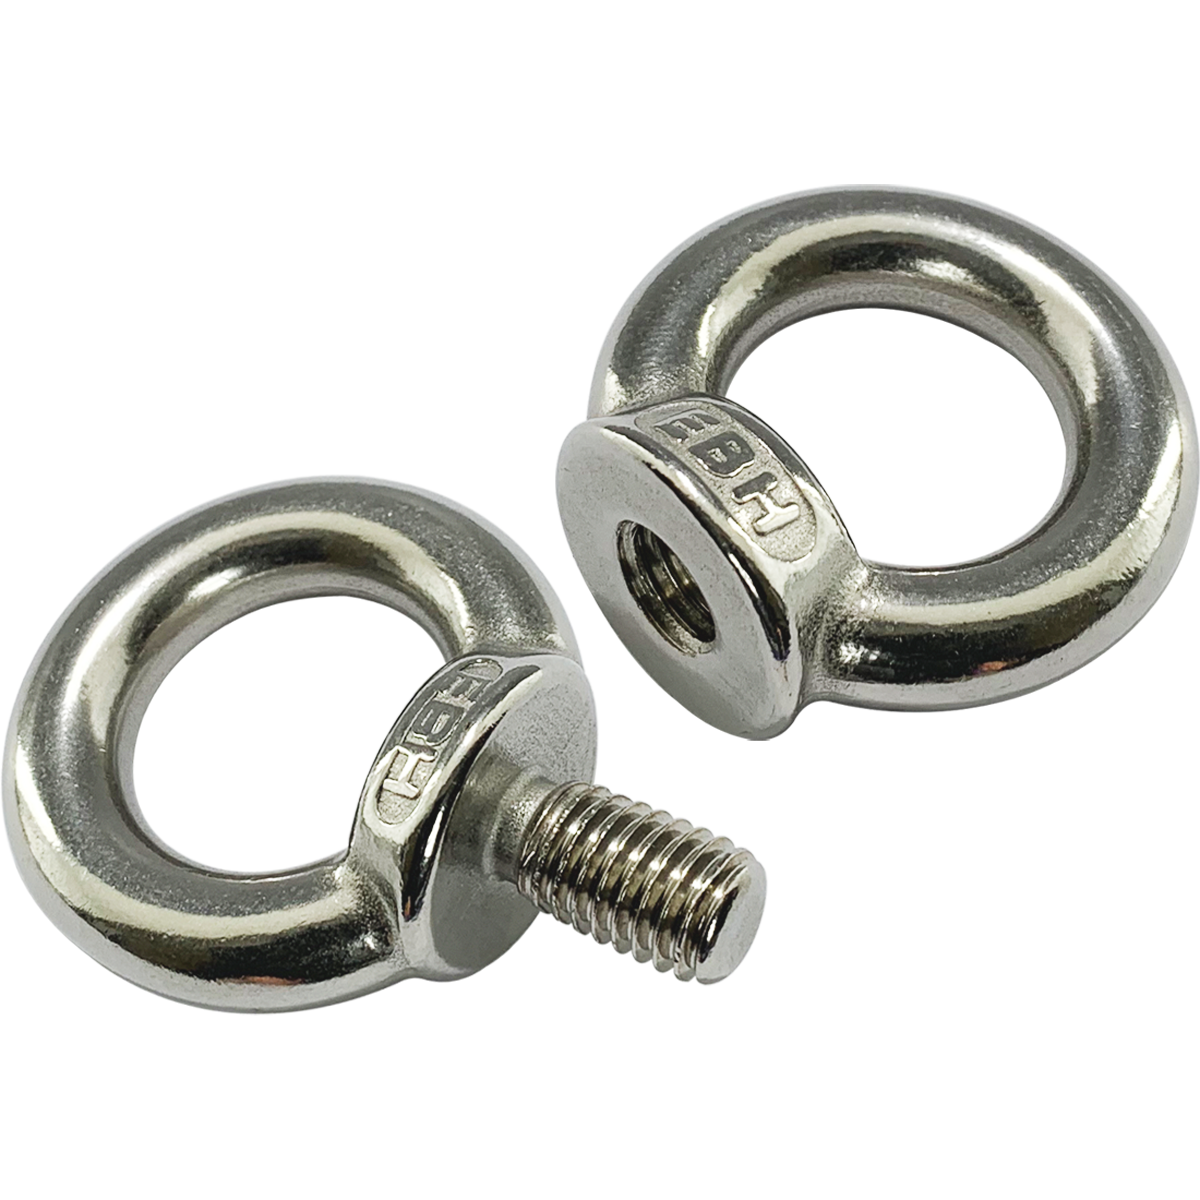 Lifting eye nuts and bolts. A circular ring of metal with an internal threaded section or external threaded length. Used for lifting or for lashing as a secure anchor point. Commonly used with rope, chains, slings, and shackles.